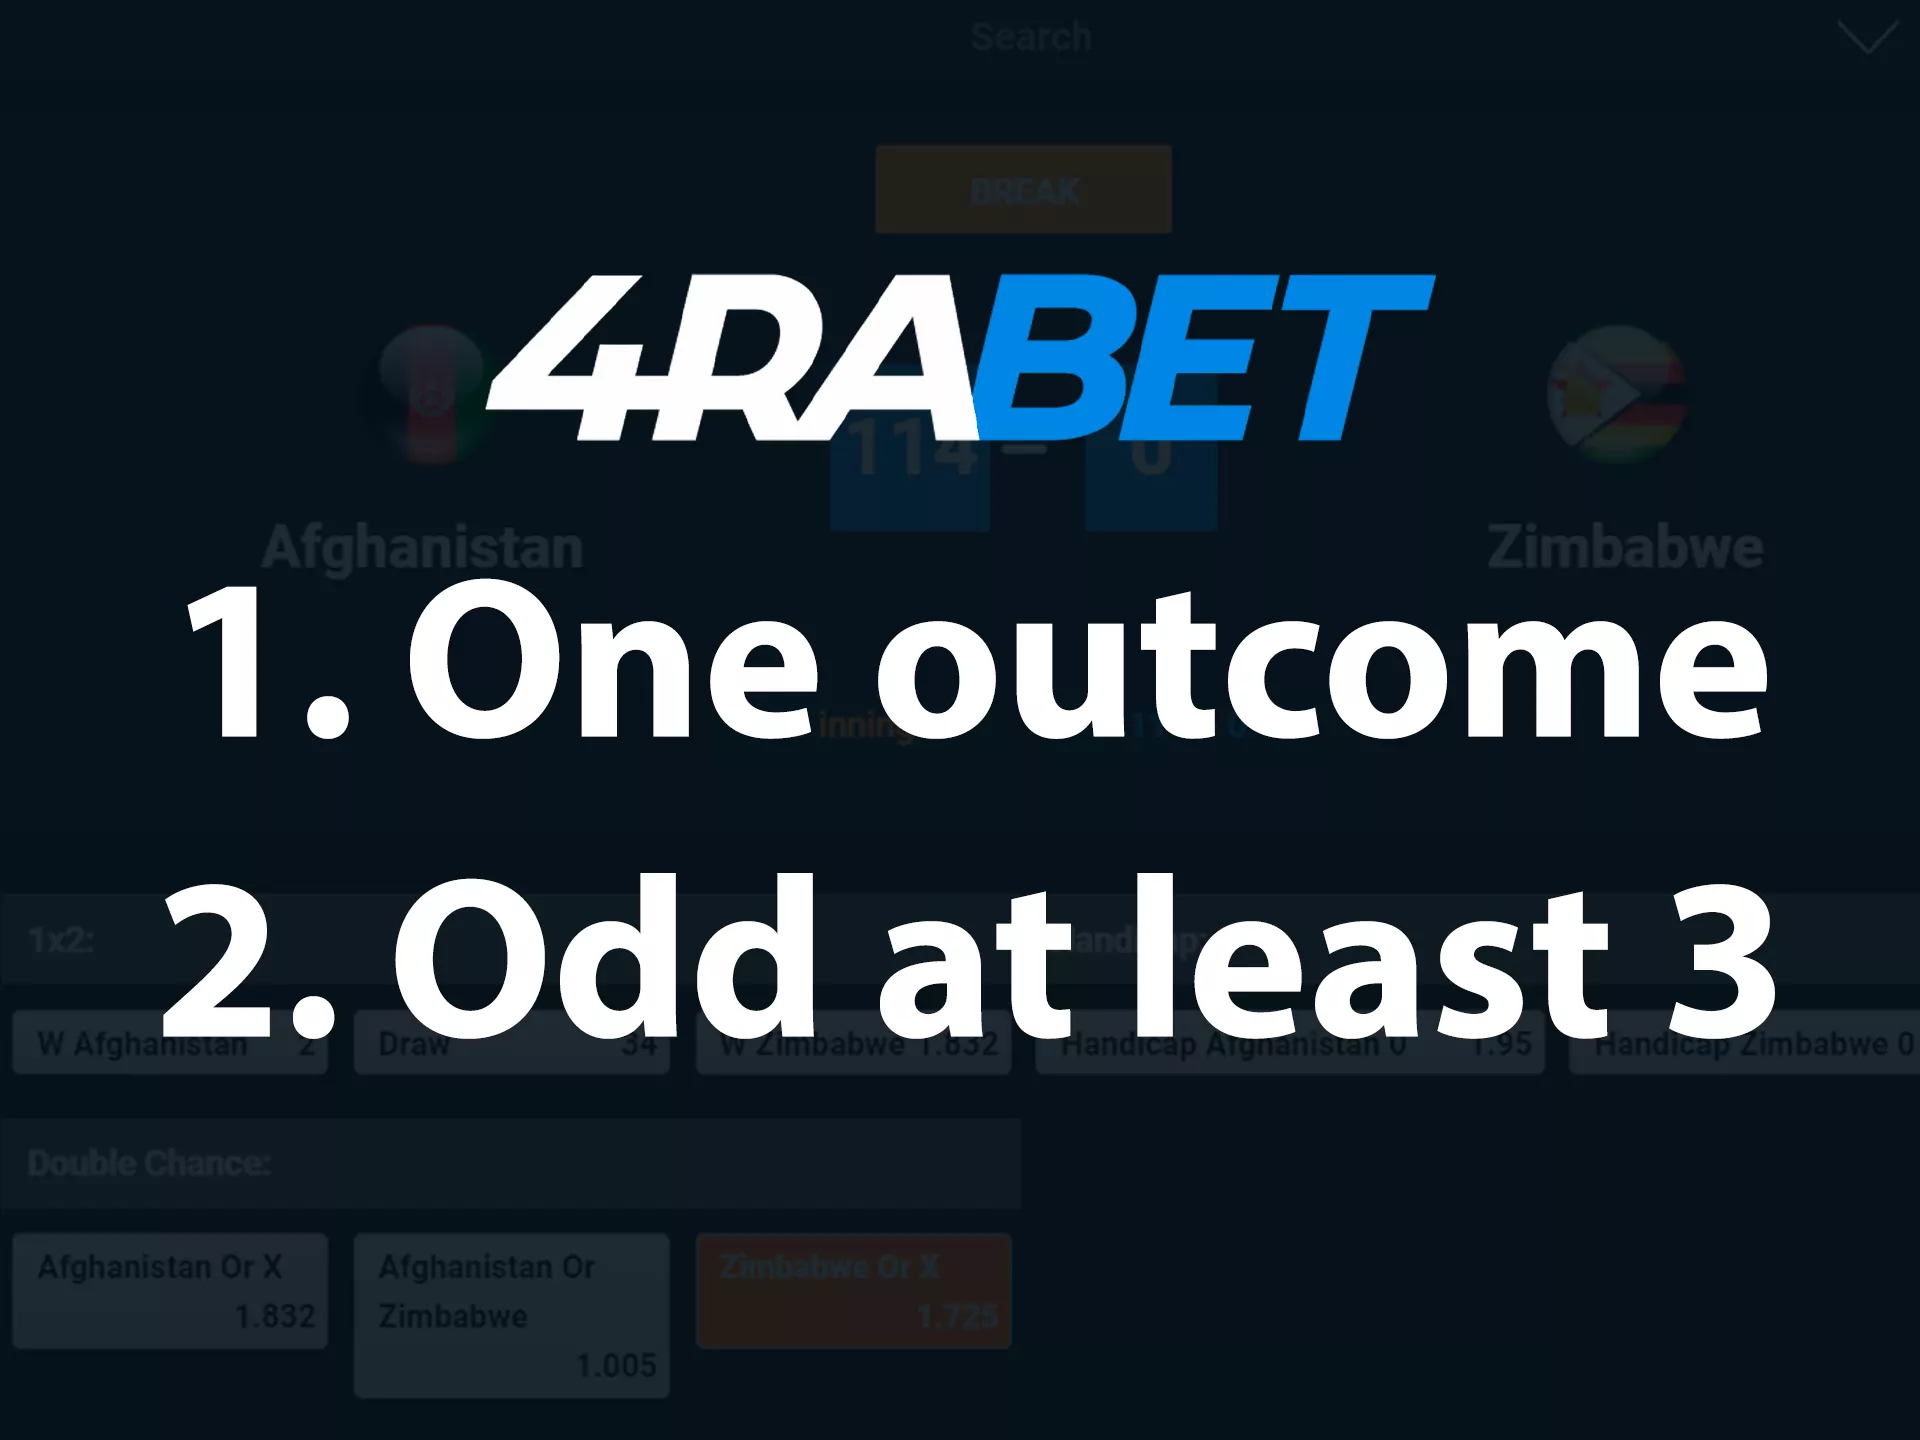 Meet the wagering conditions to be able to withdraw your winnings.